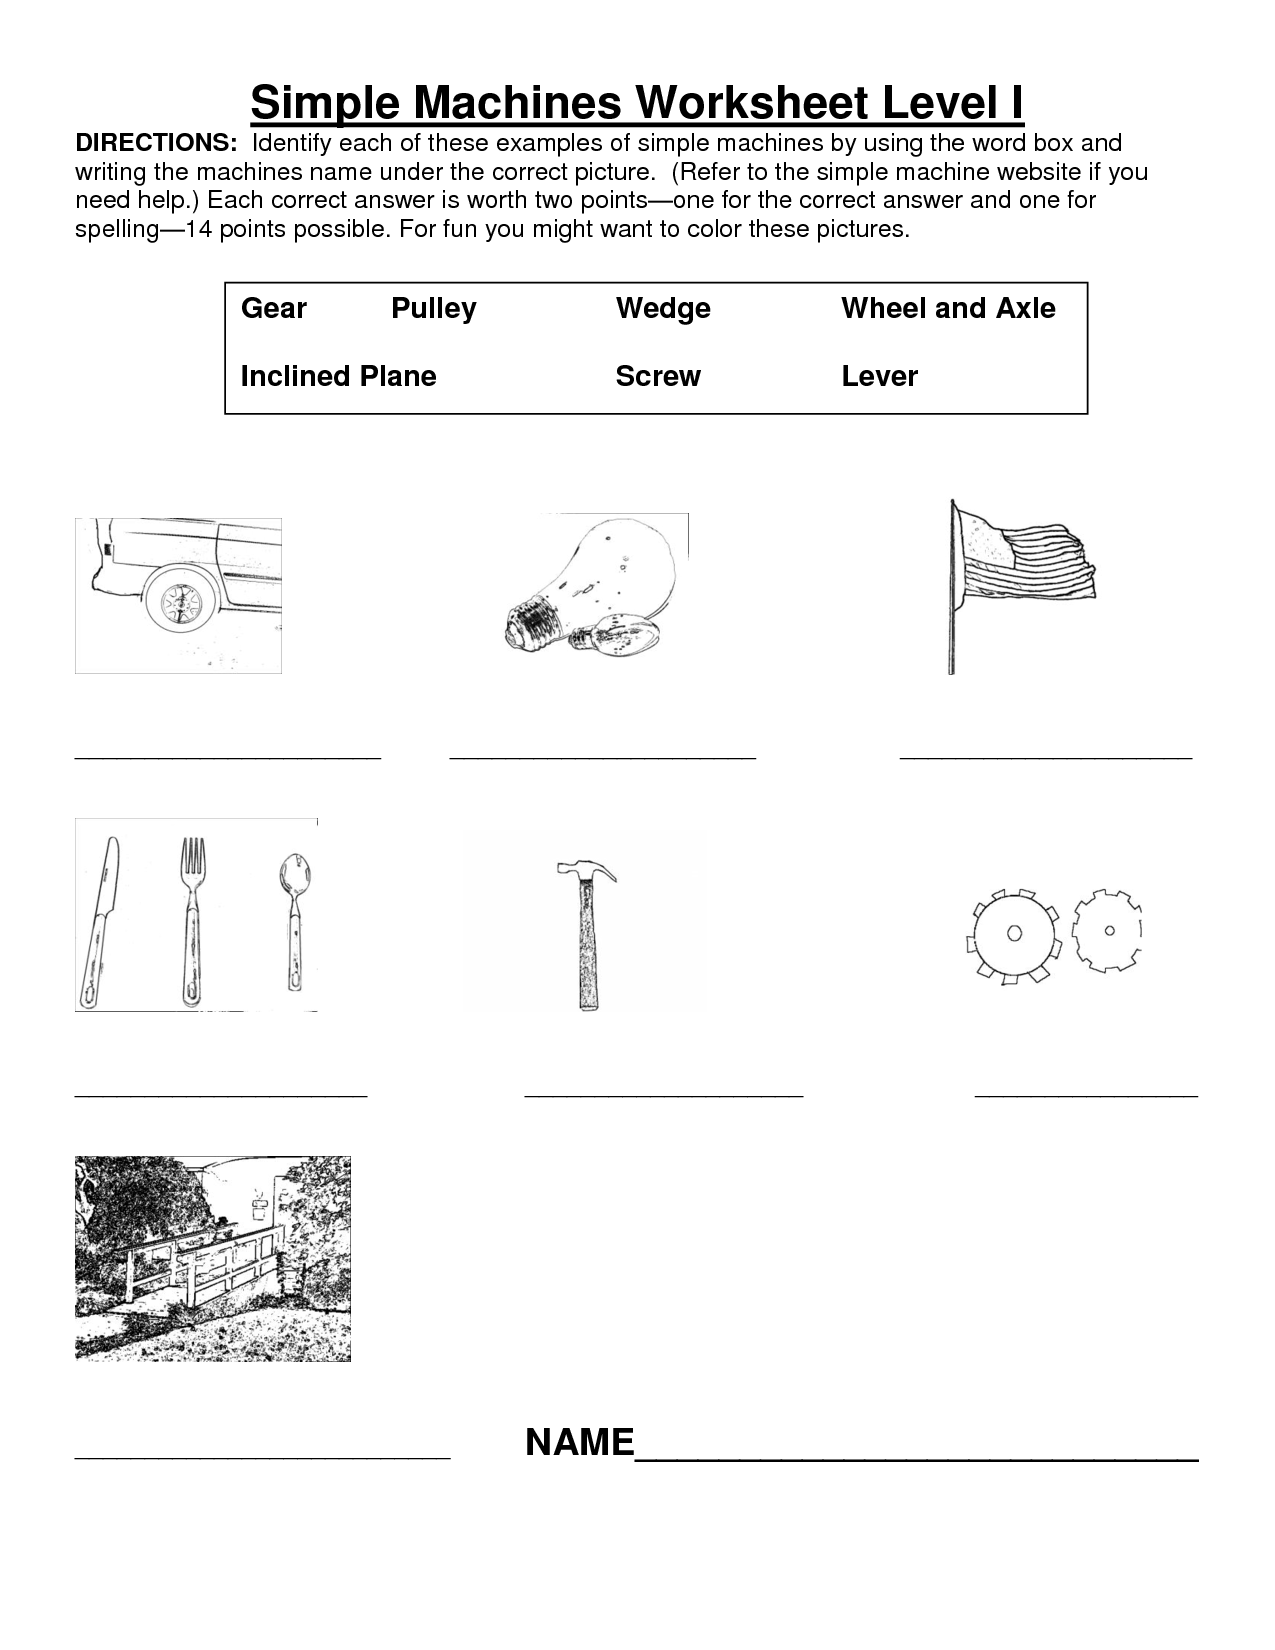 11 Best Images of 4th Grade Science Force Worksheet - Force and Motion